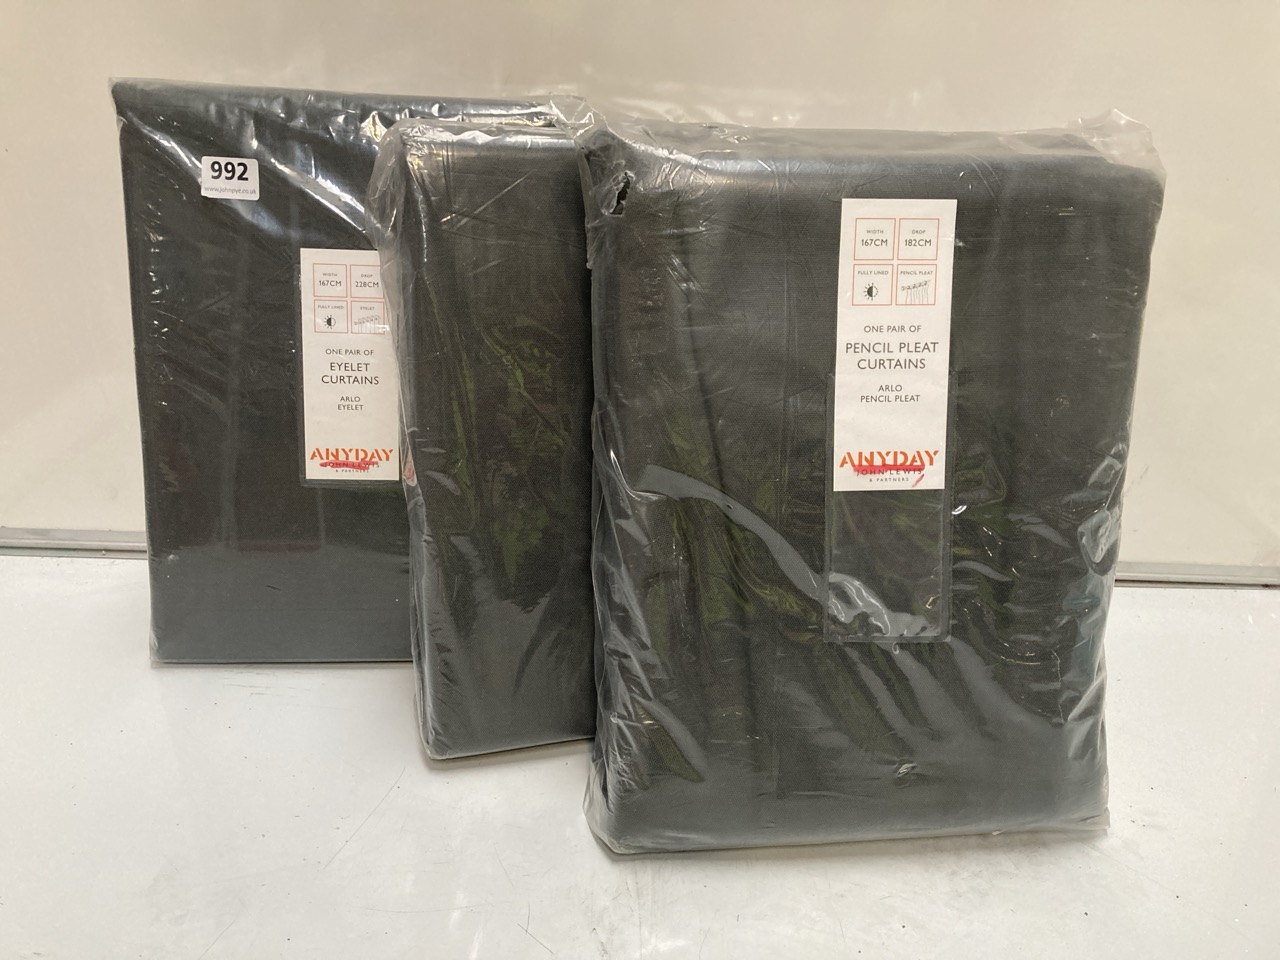 2 X PAIR JOHN LEWIS ARLO PENCIL PLEAT CURTAINS 167X182CM FULLY LINED, TO ALSO INCLUDE A PAIR OF ARLO EYELET CURTAINS 167X228CM